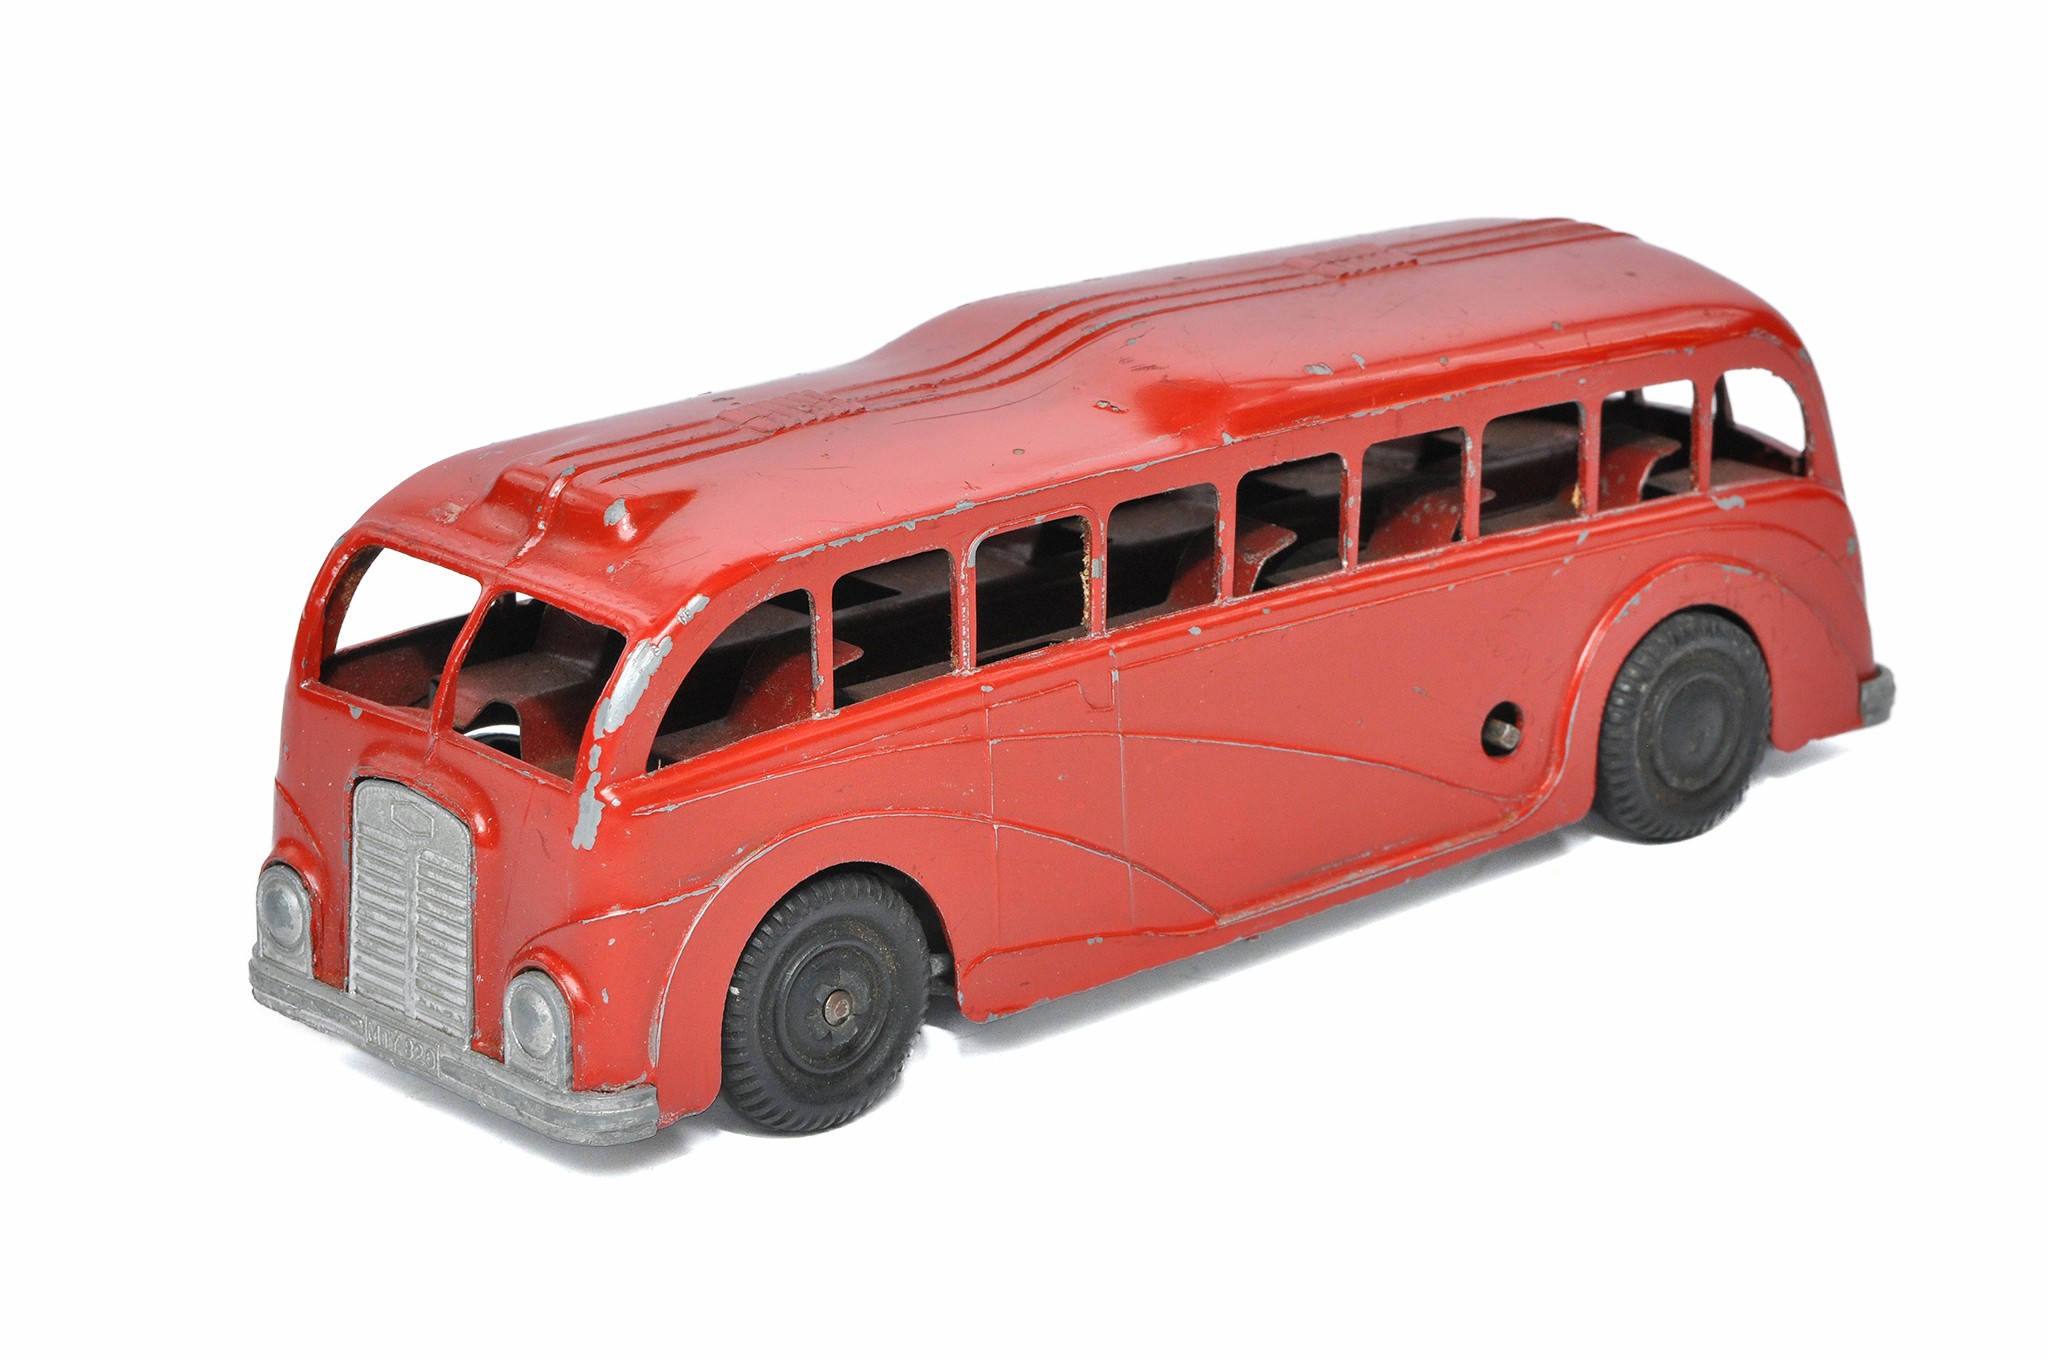 Mettoy Mechanical issue comprising Single Decker Bus. Red. Generally good, some signs of age related